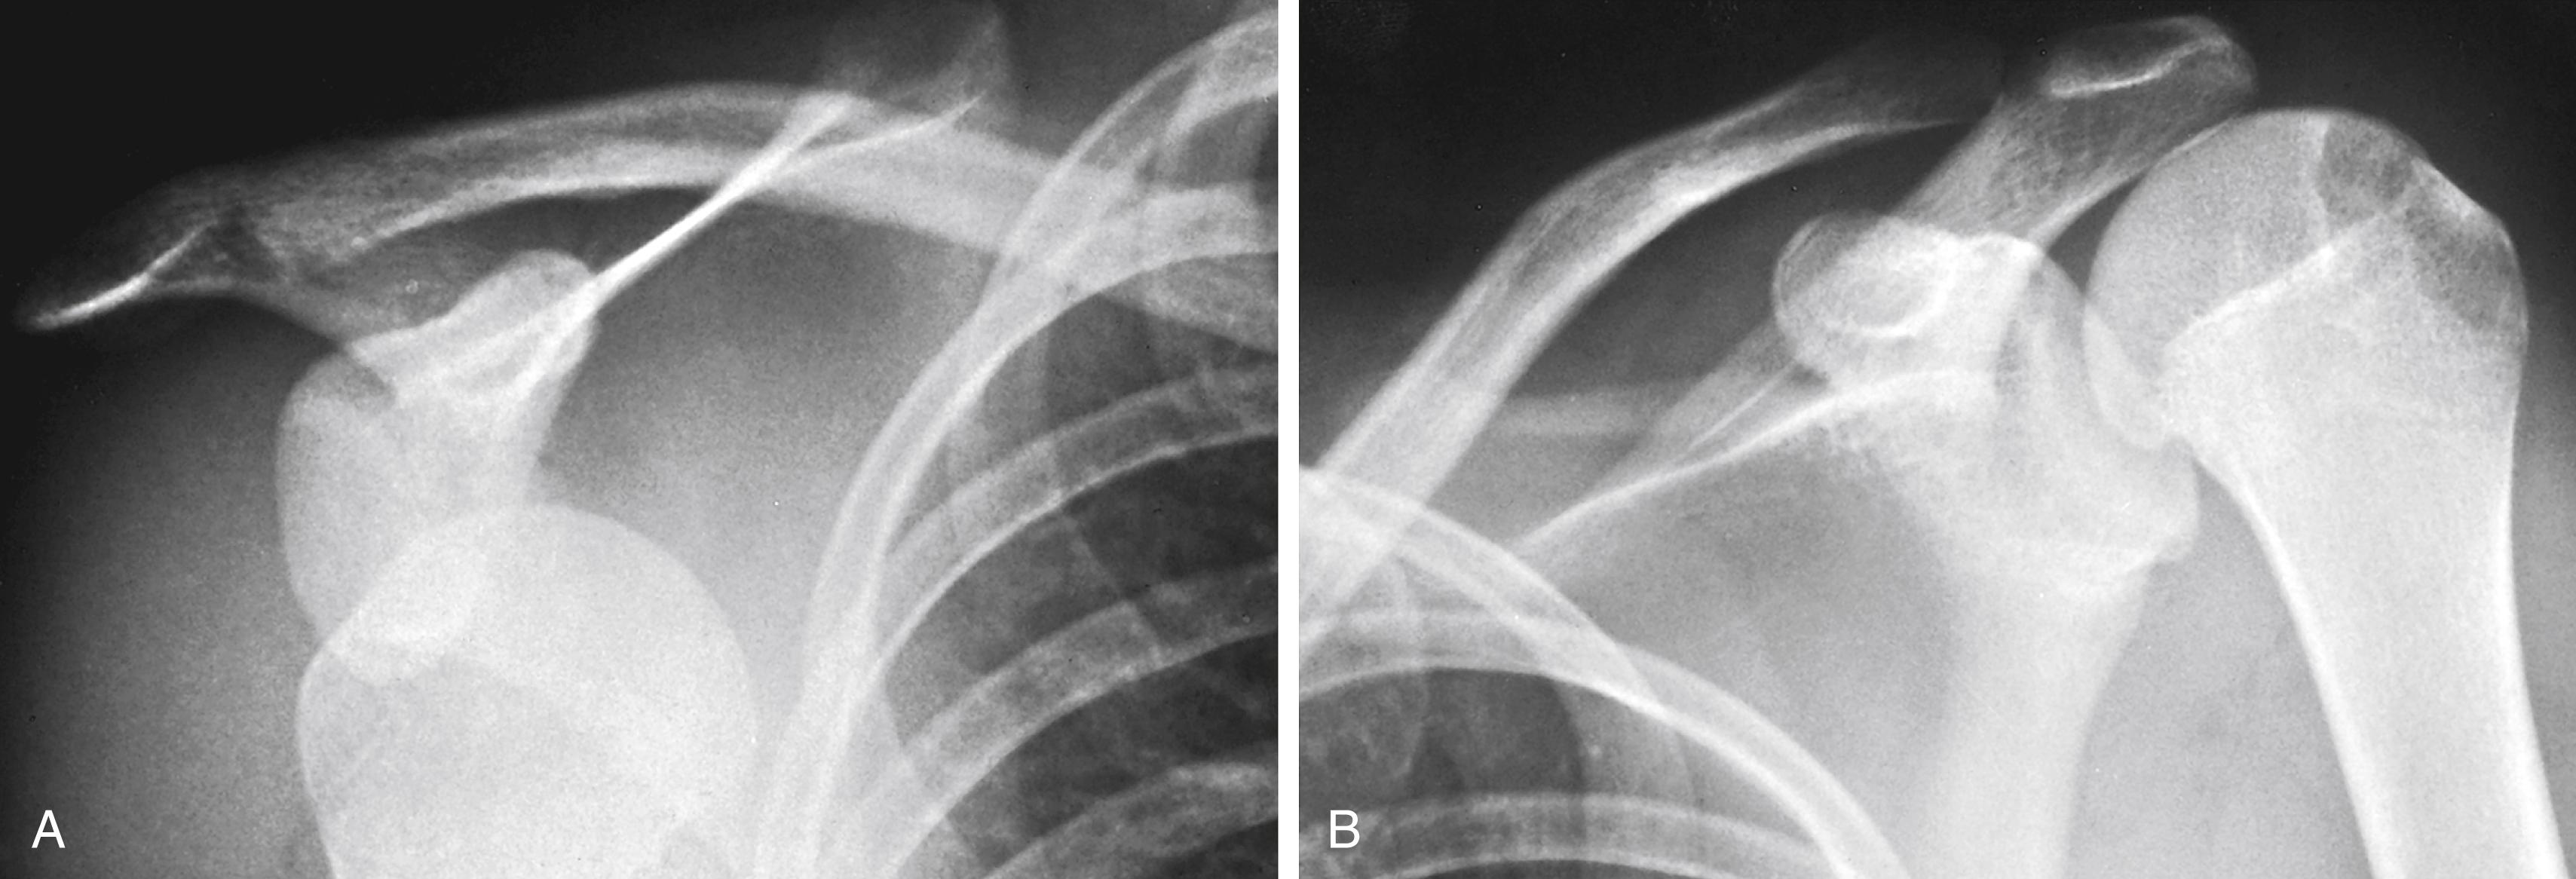 Fig. 22.60, (A) Anterior dislocation of the right shoulder. The humeral head is not in the glenoid fossa but is displaced anteriorly. (B) The normal relationship is seen in this comparison view of the left shoulder. The injury occurred when the patient was taking a back swing for a hockey shot. The patient felt a pop with the immediate onset of severe pain. Note that his epiphyses have fused.